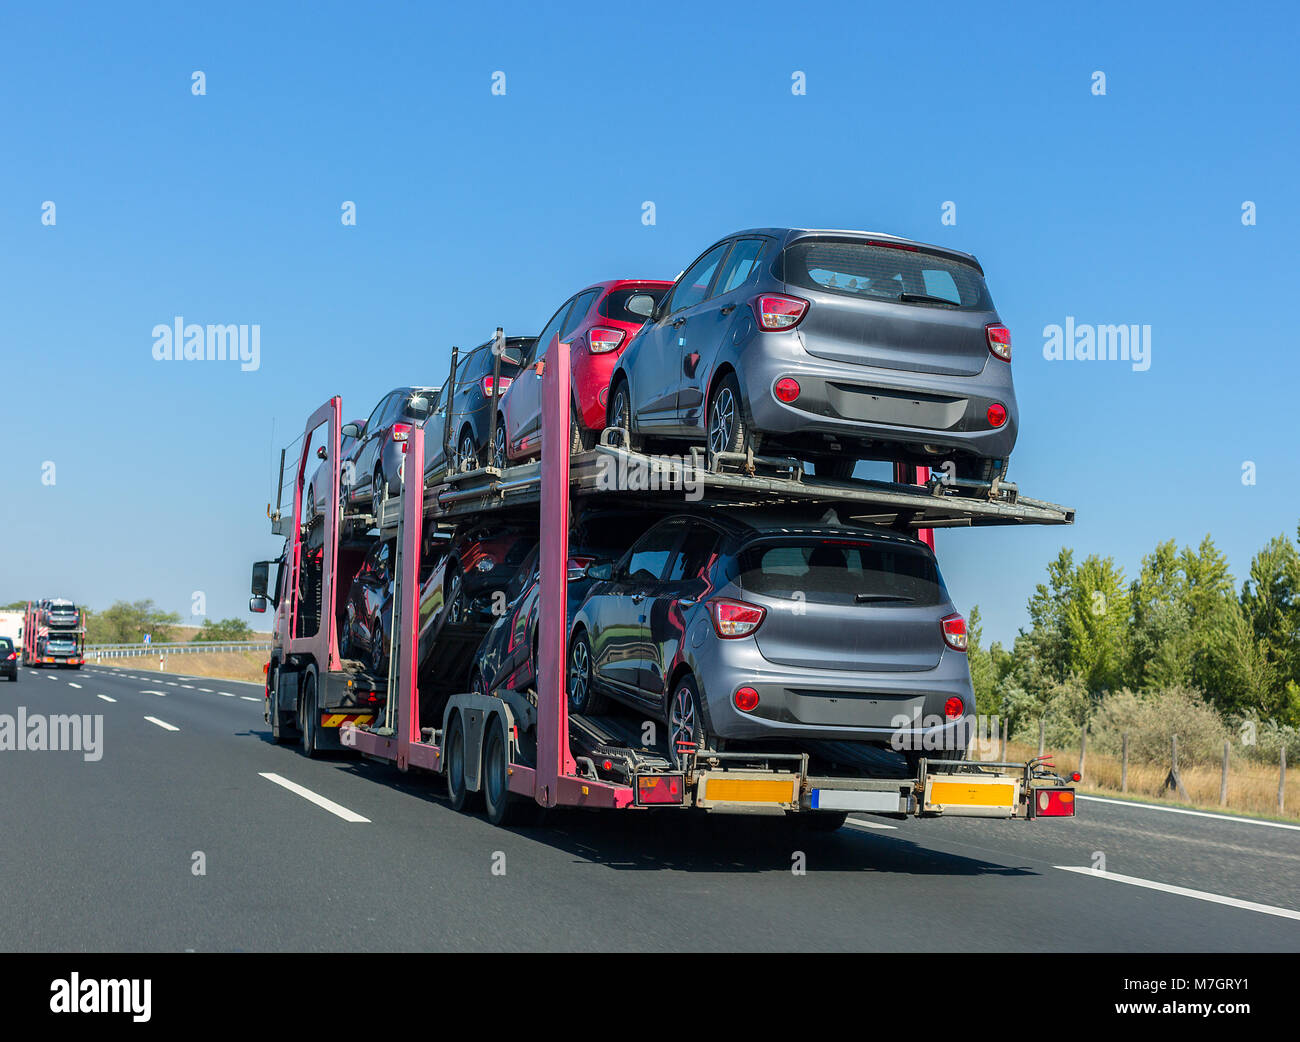 Big car carrier trailer with cars on bunk platform. Car transport truck on the highway Stock Photo